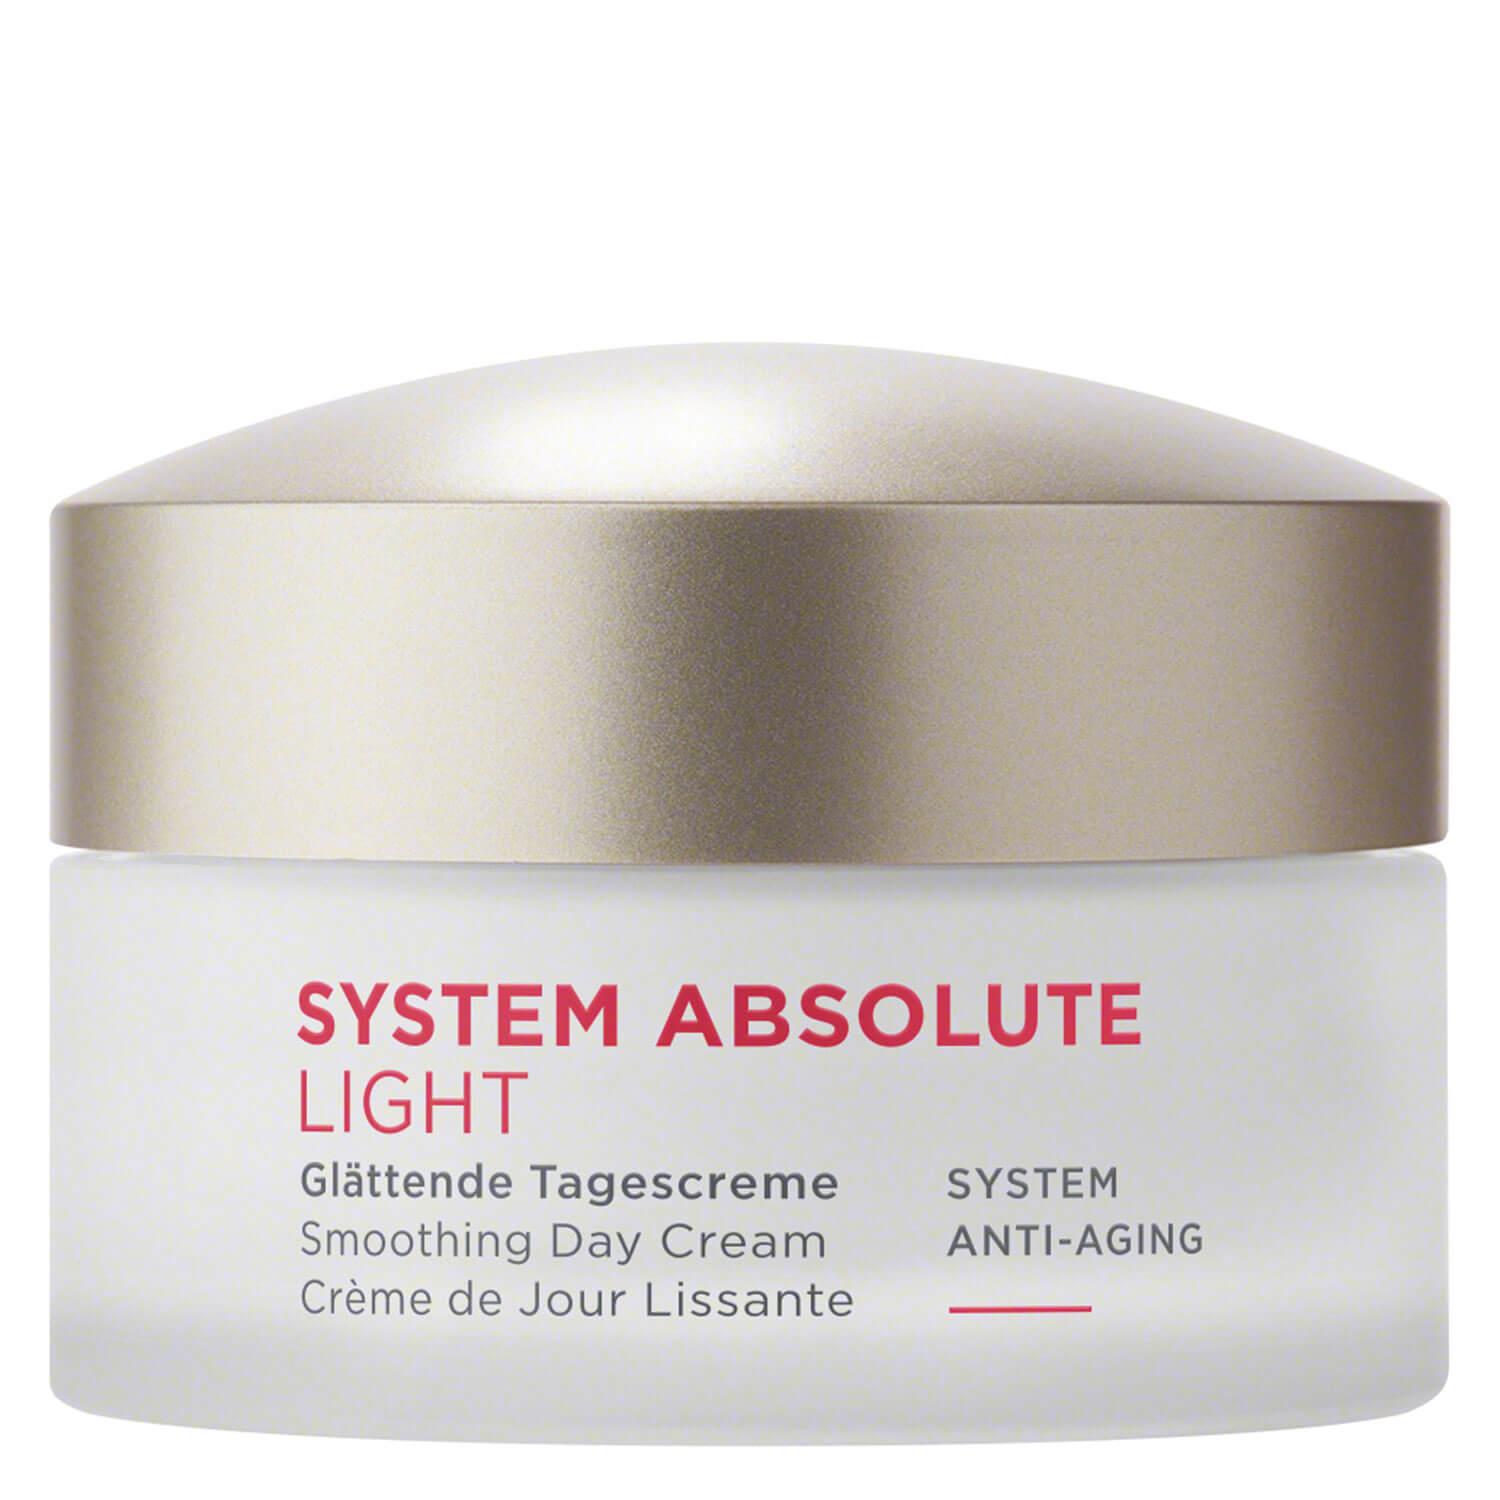 System Absolute - Anti-Aging Glättende Tagescreme Light